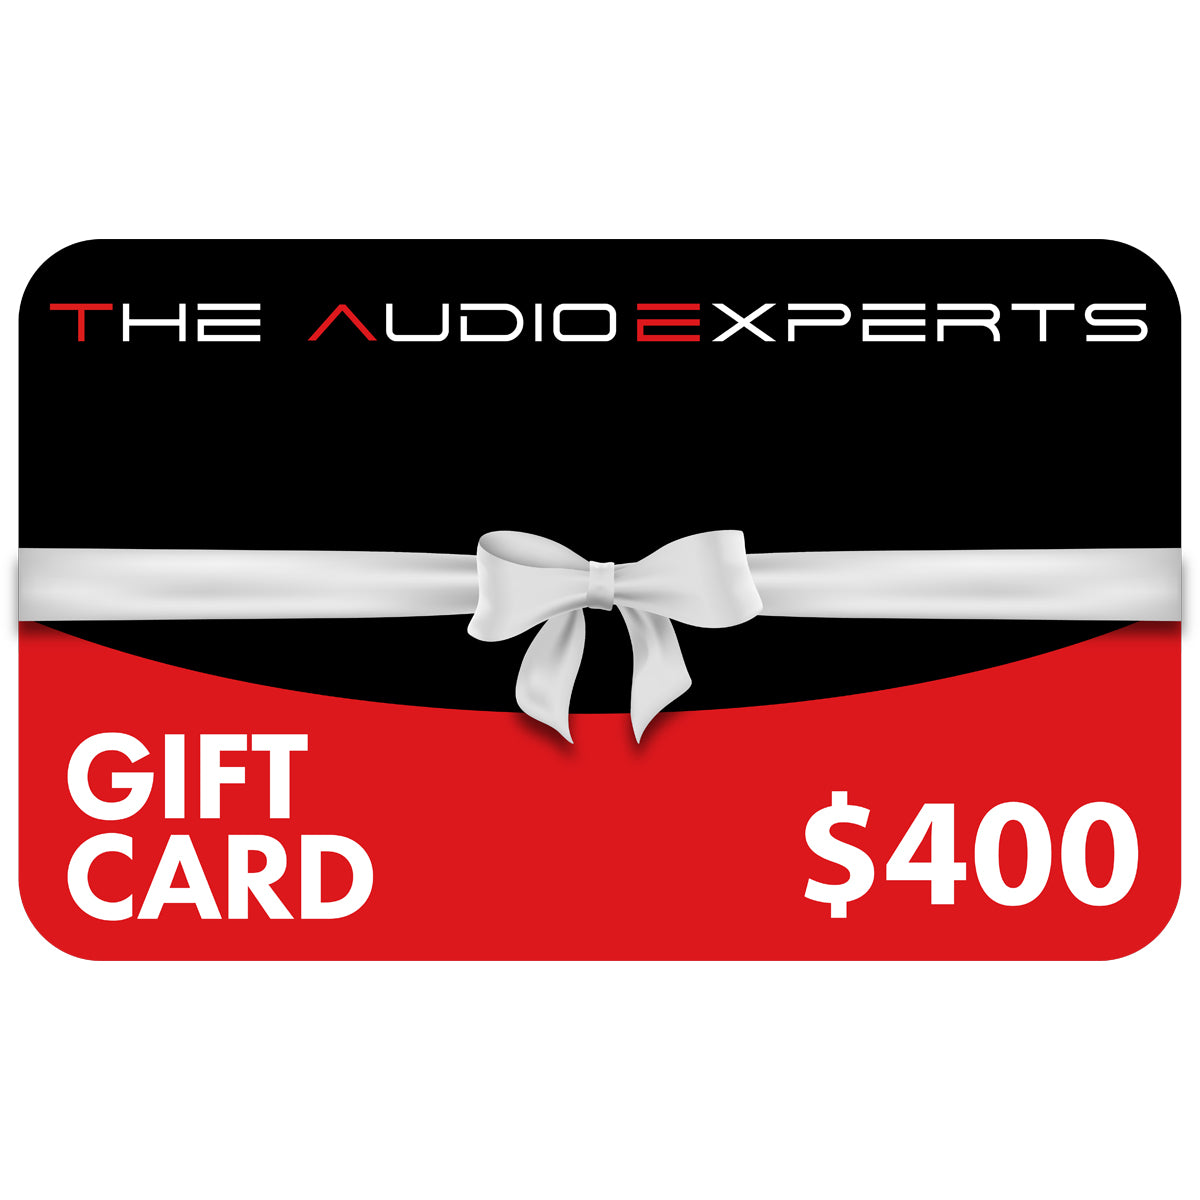 Gift Card - A$400 - The Audio Experts